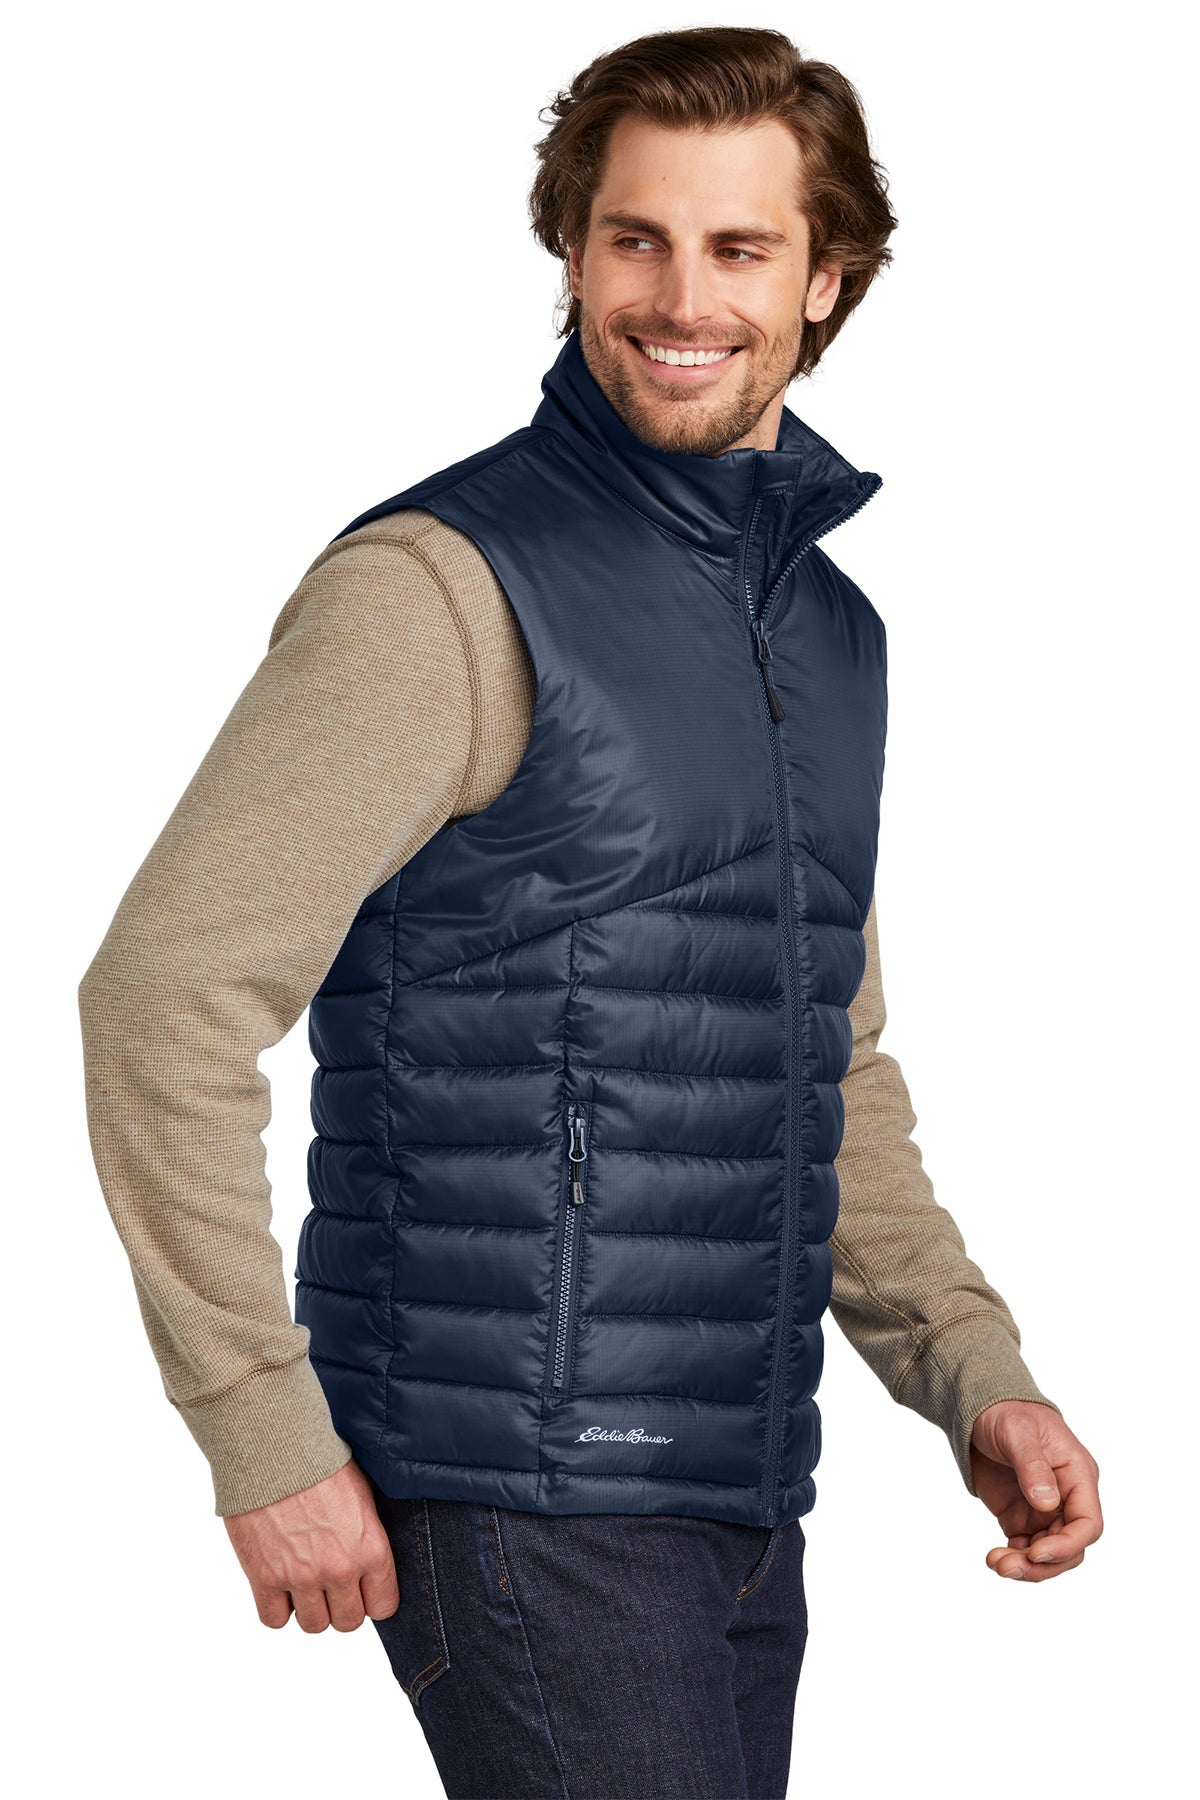 Eddie Bauer Customized Quilted Vests, River Blue Navy